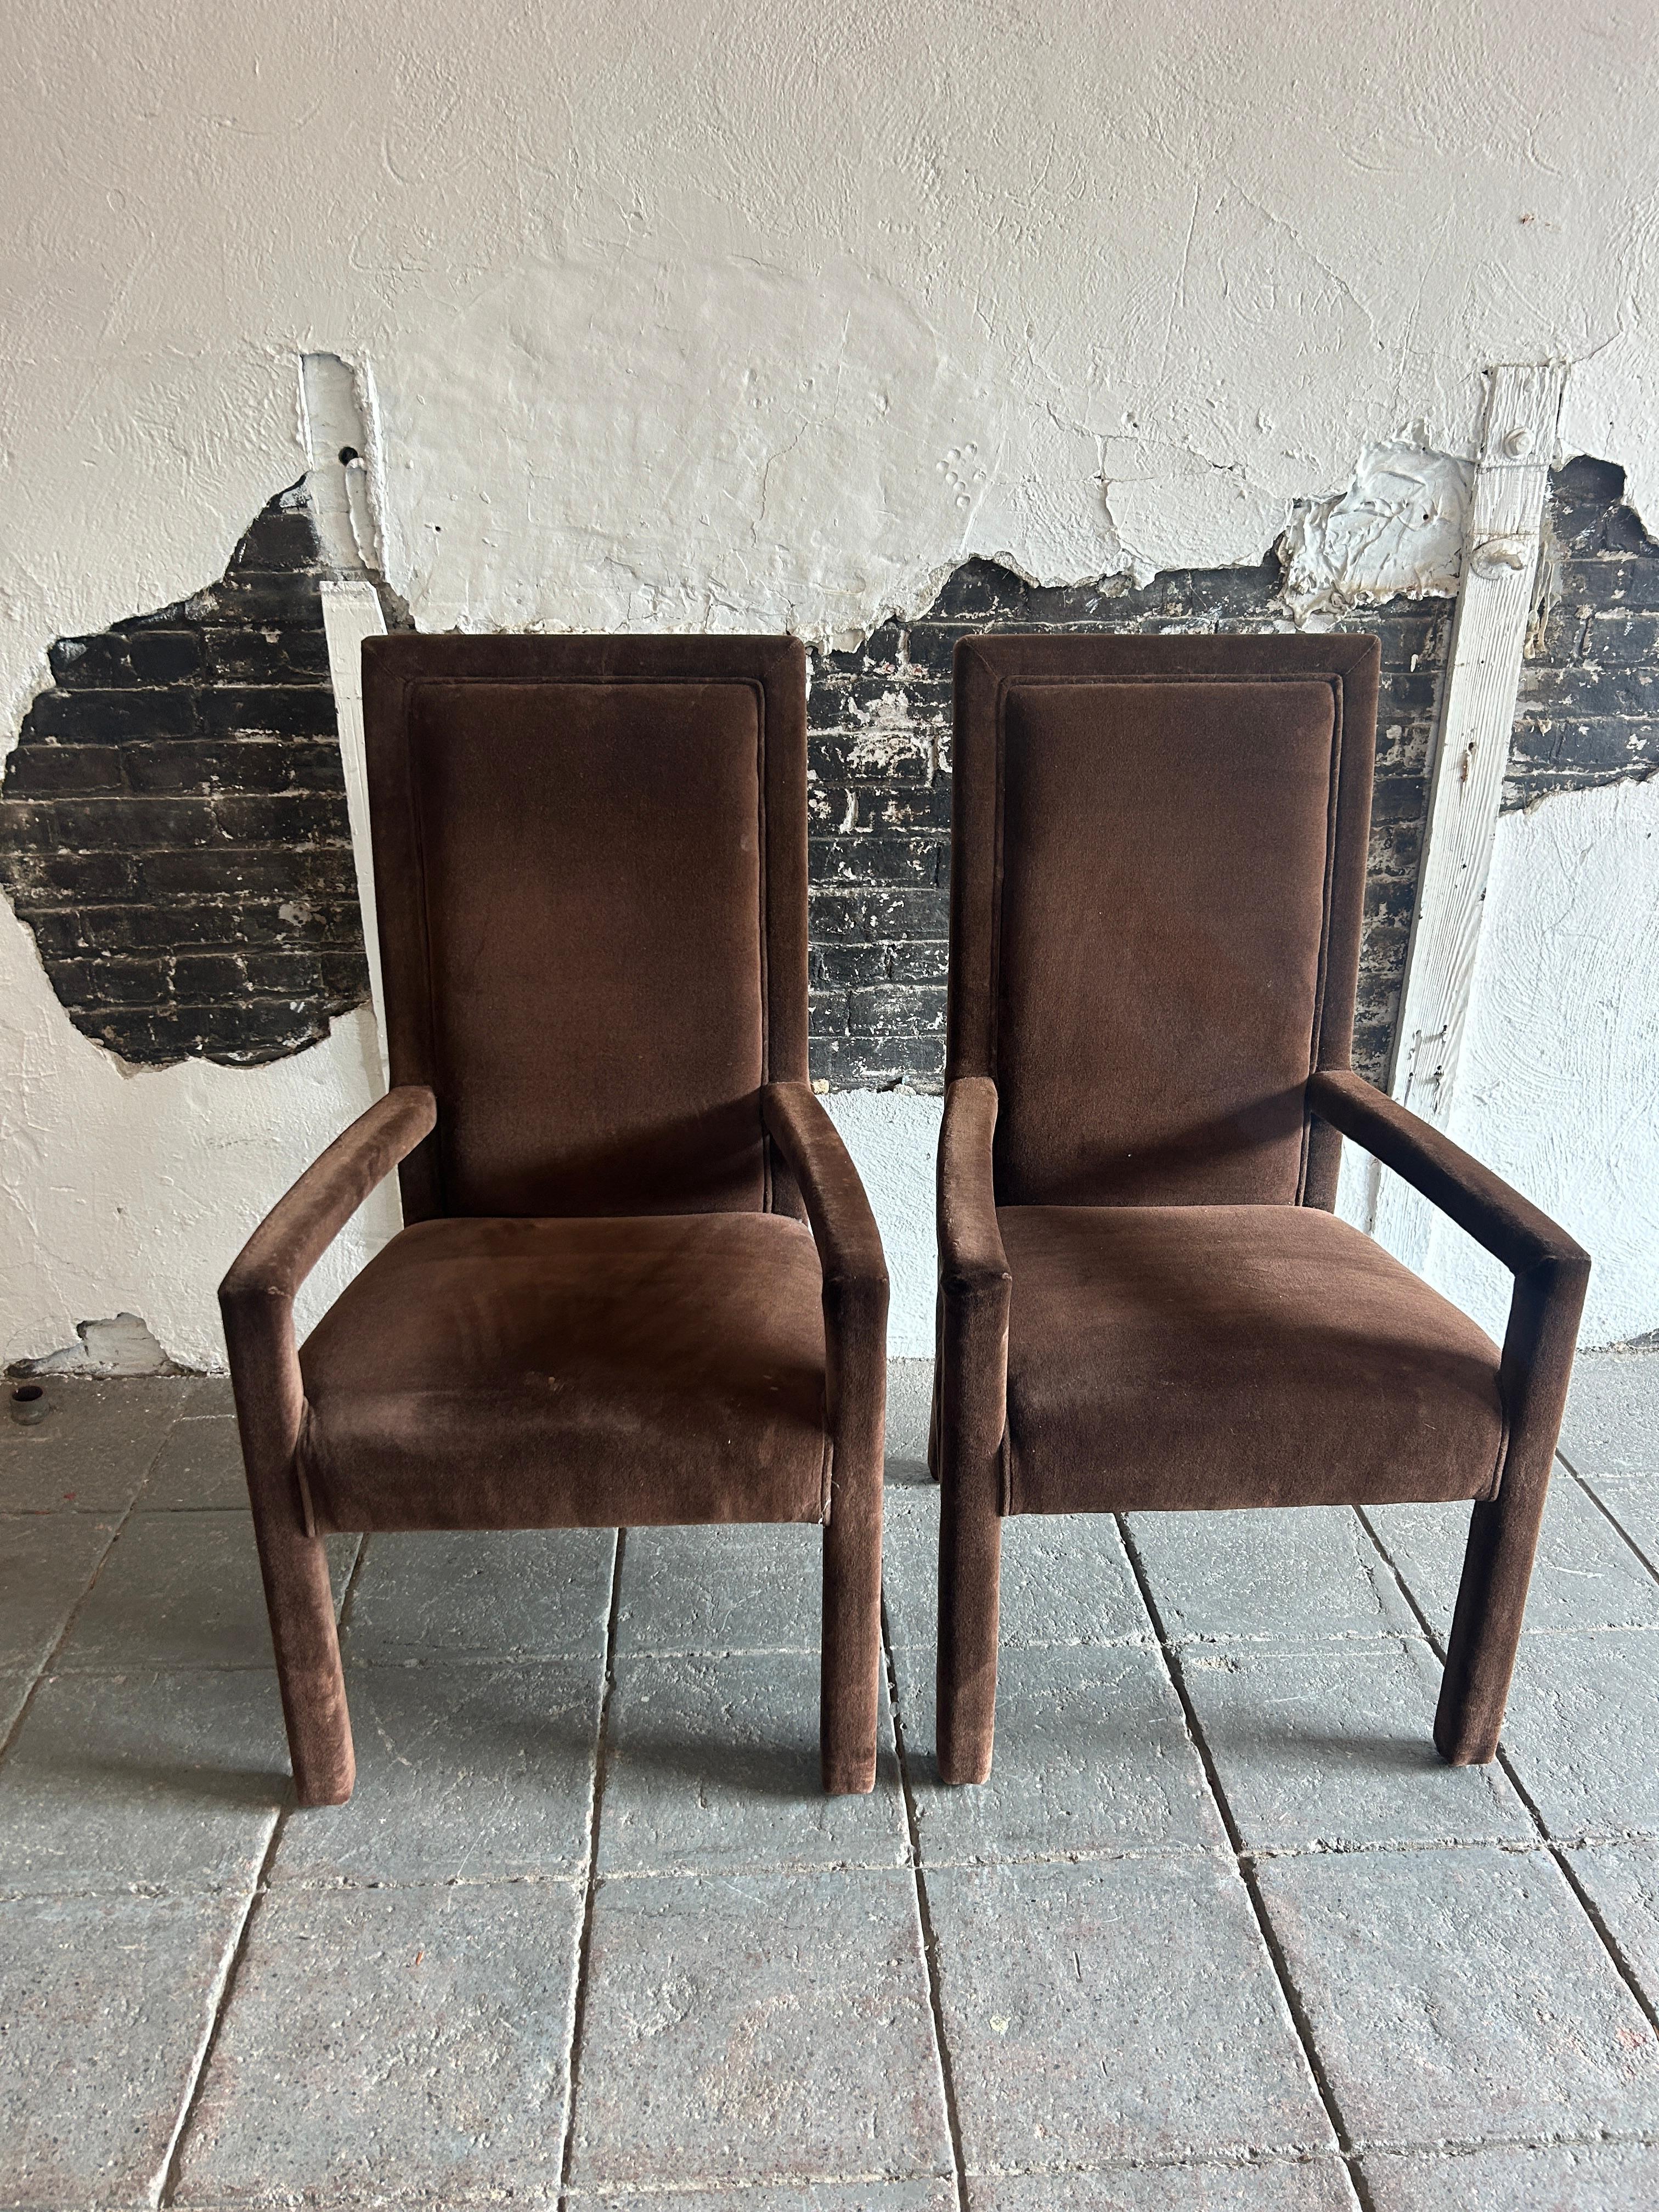 Set of 4 Milo baughman Thayer Coggin fully upholstered velvet parsons dining chairs. A nice set of 4 chairs in chocolate brown velvet. Both chairs are matching and all in the same vintage condition. Made in USA located in Brooklyn NYC.

Sold as a